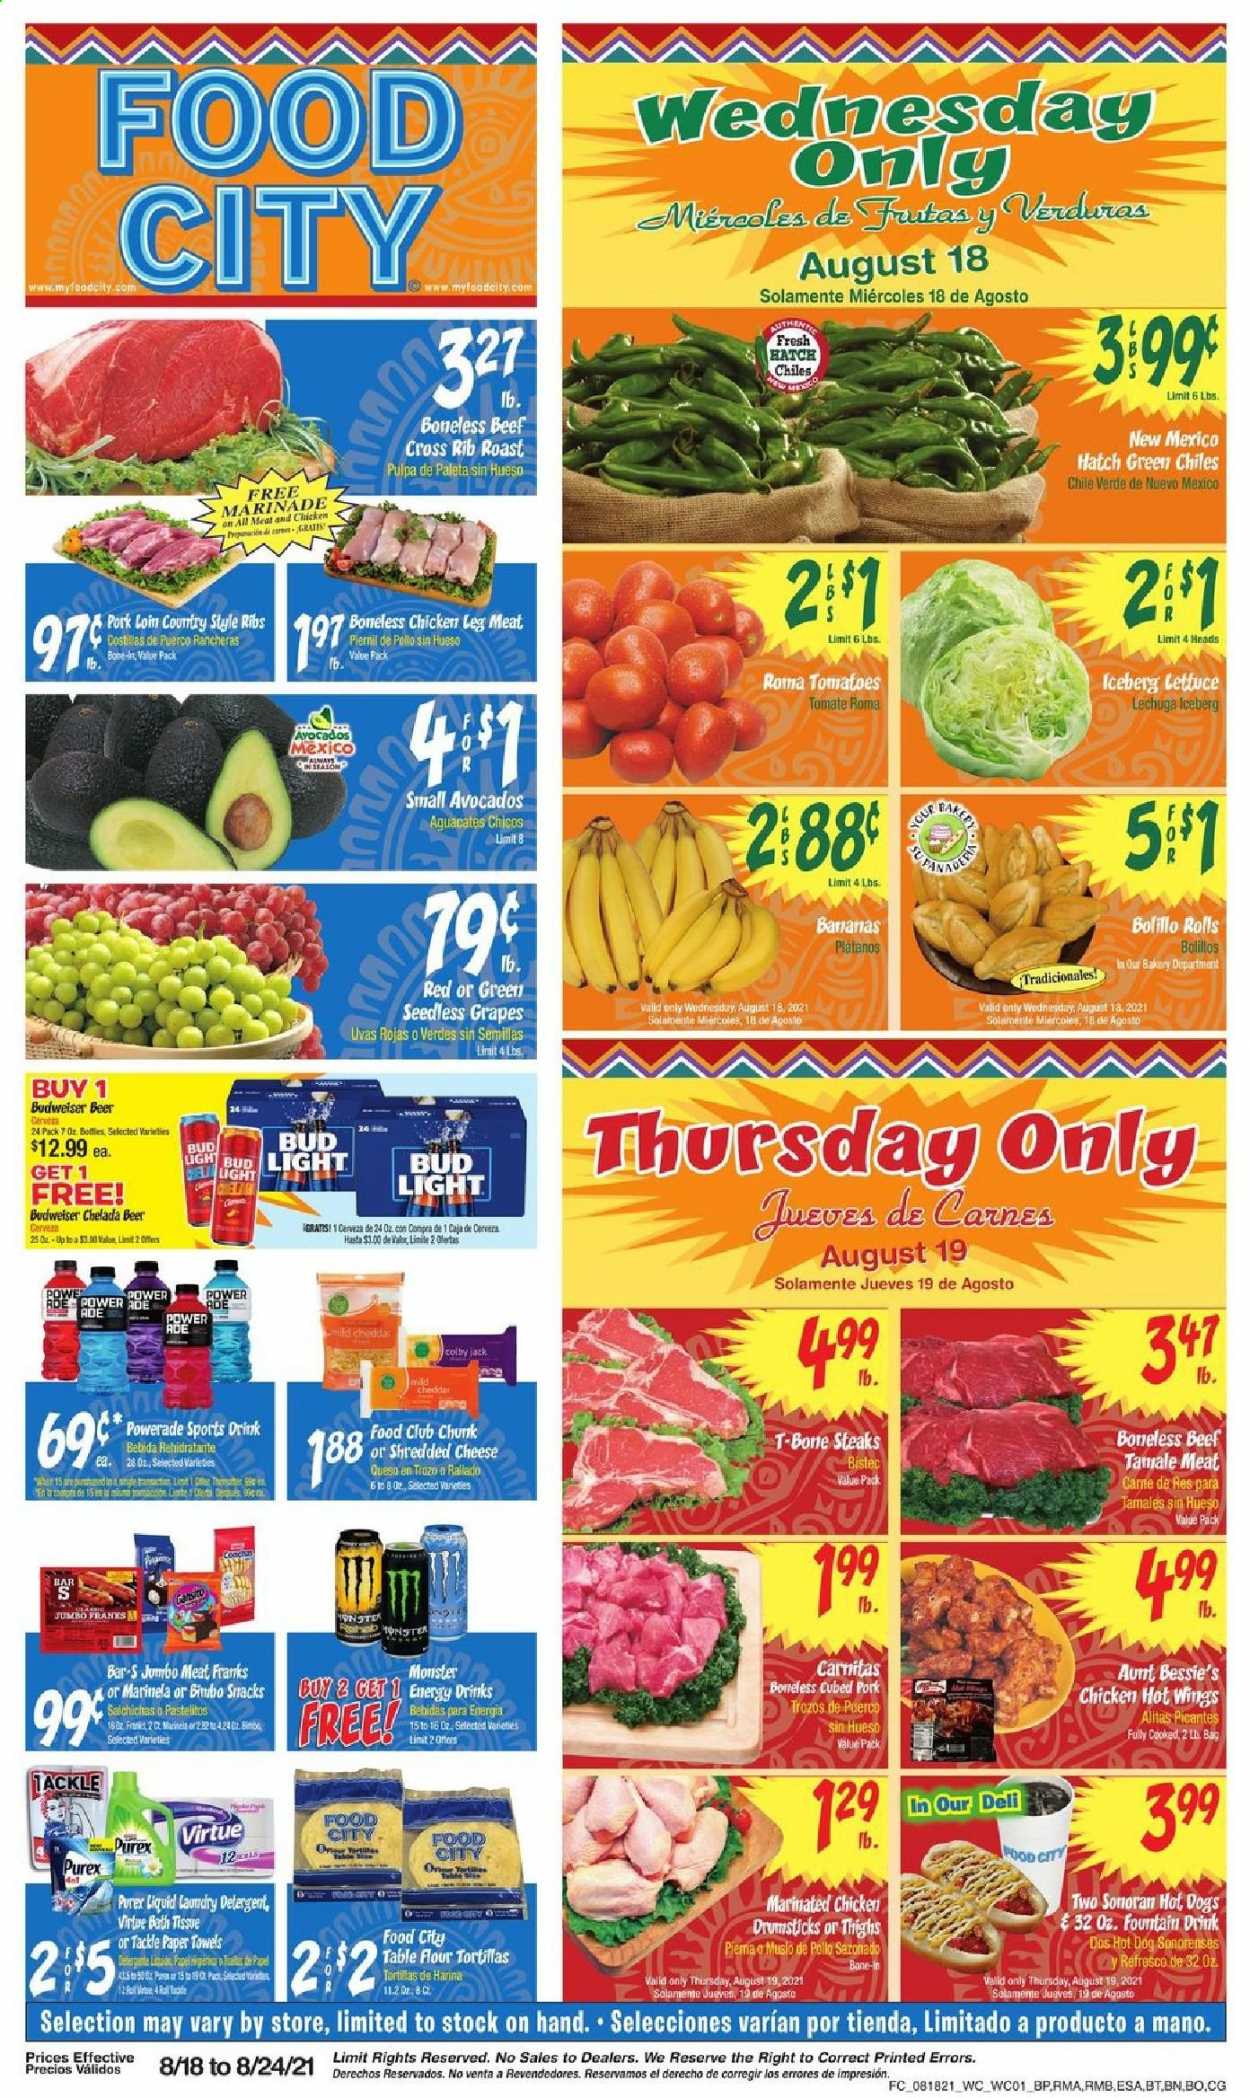 thumbnail - Food City Flyer - 08/18/2021 - 08/24/2021 - Sales products - Budweiser, seedless grapes, Aunt Bessie's, tomatoes, lettuce, avocado, bananas, grapes, hot dog, Colby cheese, mild cheddar, shredded cheese, cheddar, flour, marinade, Powerade, energy drink, Monster, beer, Bud Light, chicken legs, beef meat, t-bone steak, steak. Page 1.